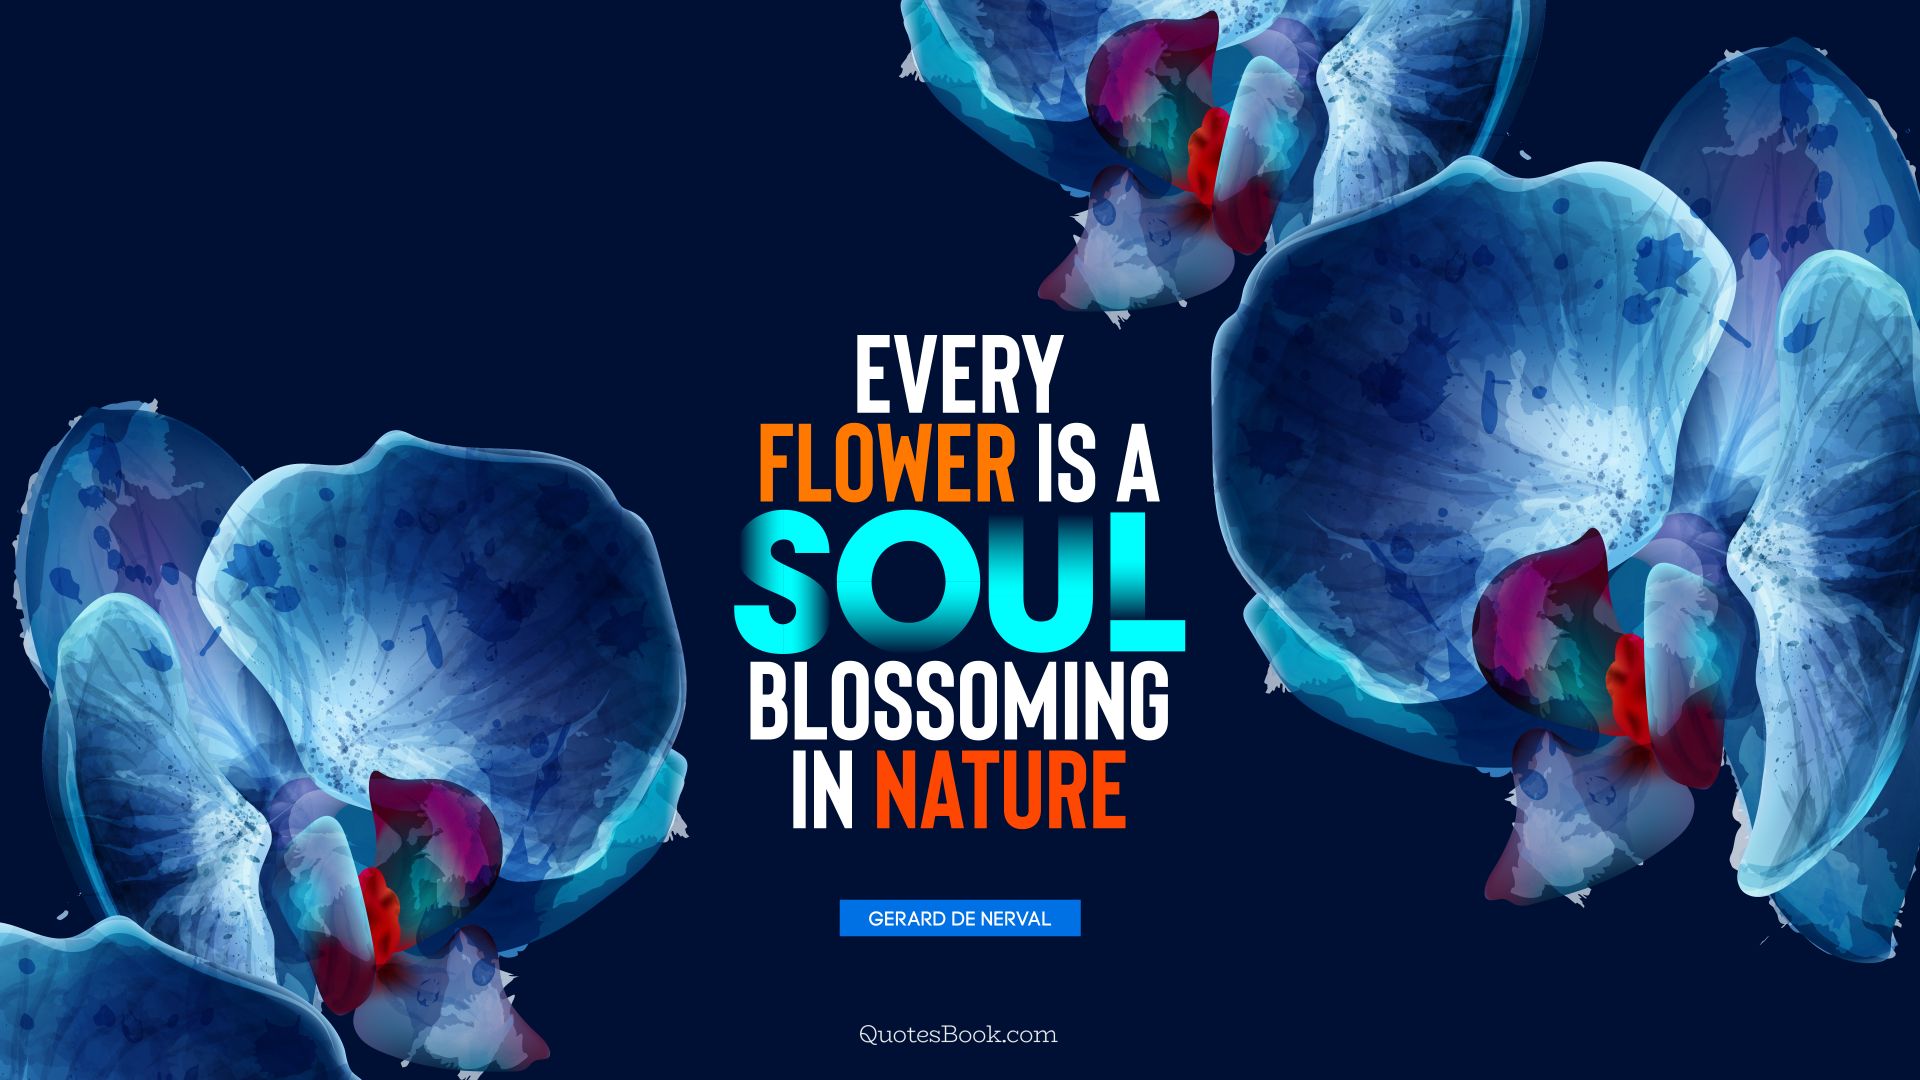 Every flower is a soul blossoming in nature. - Quote by Gerard de Nerval